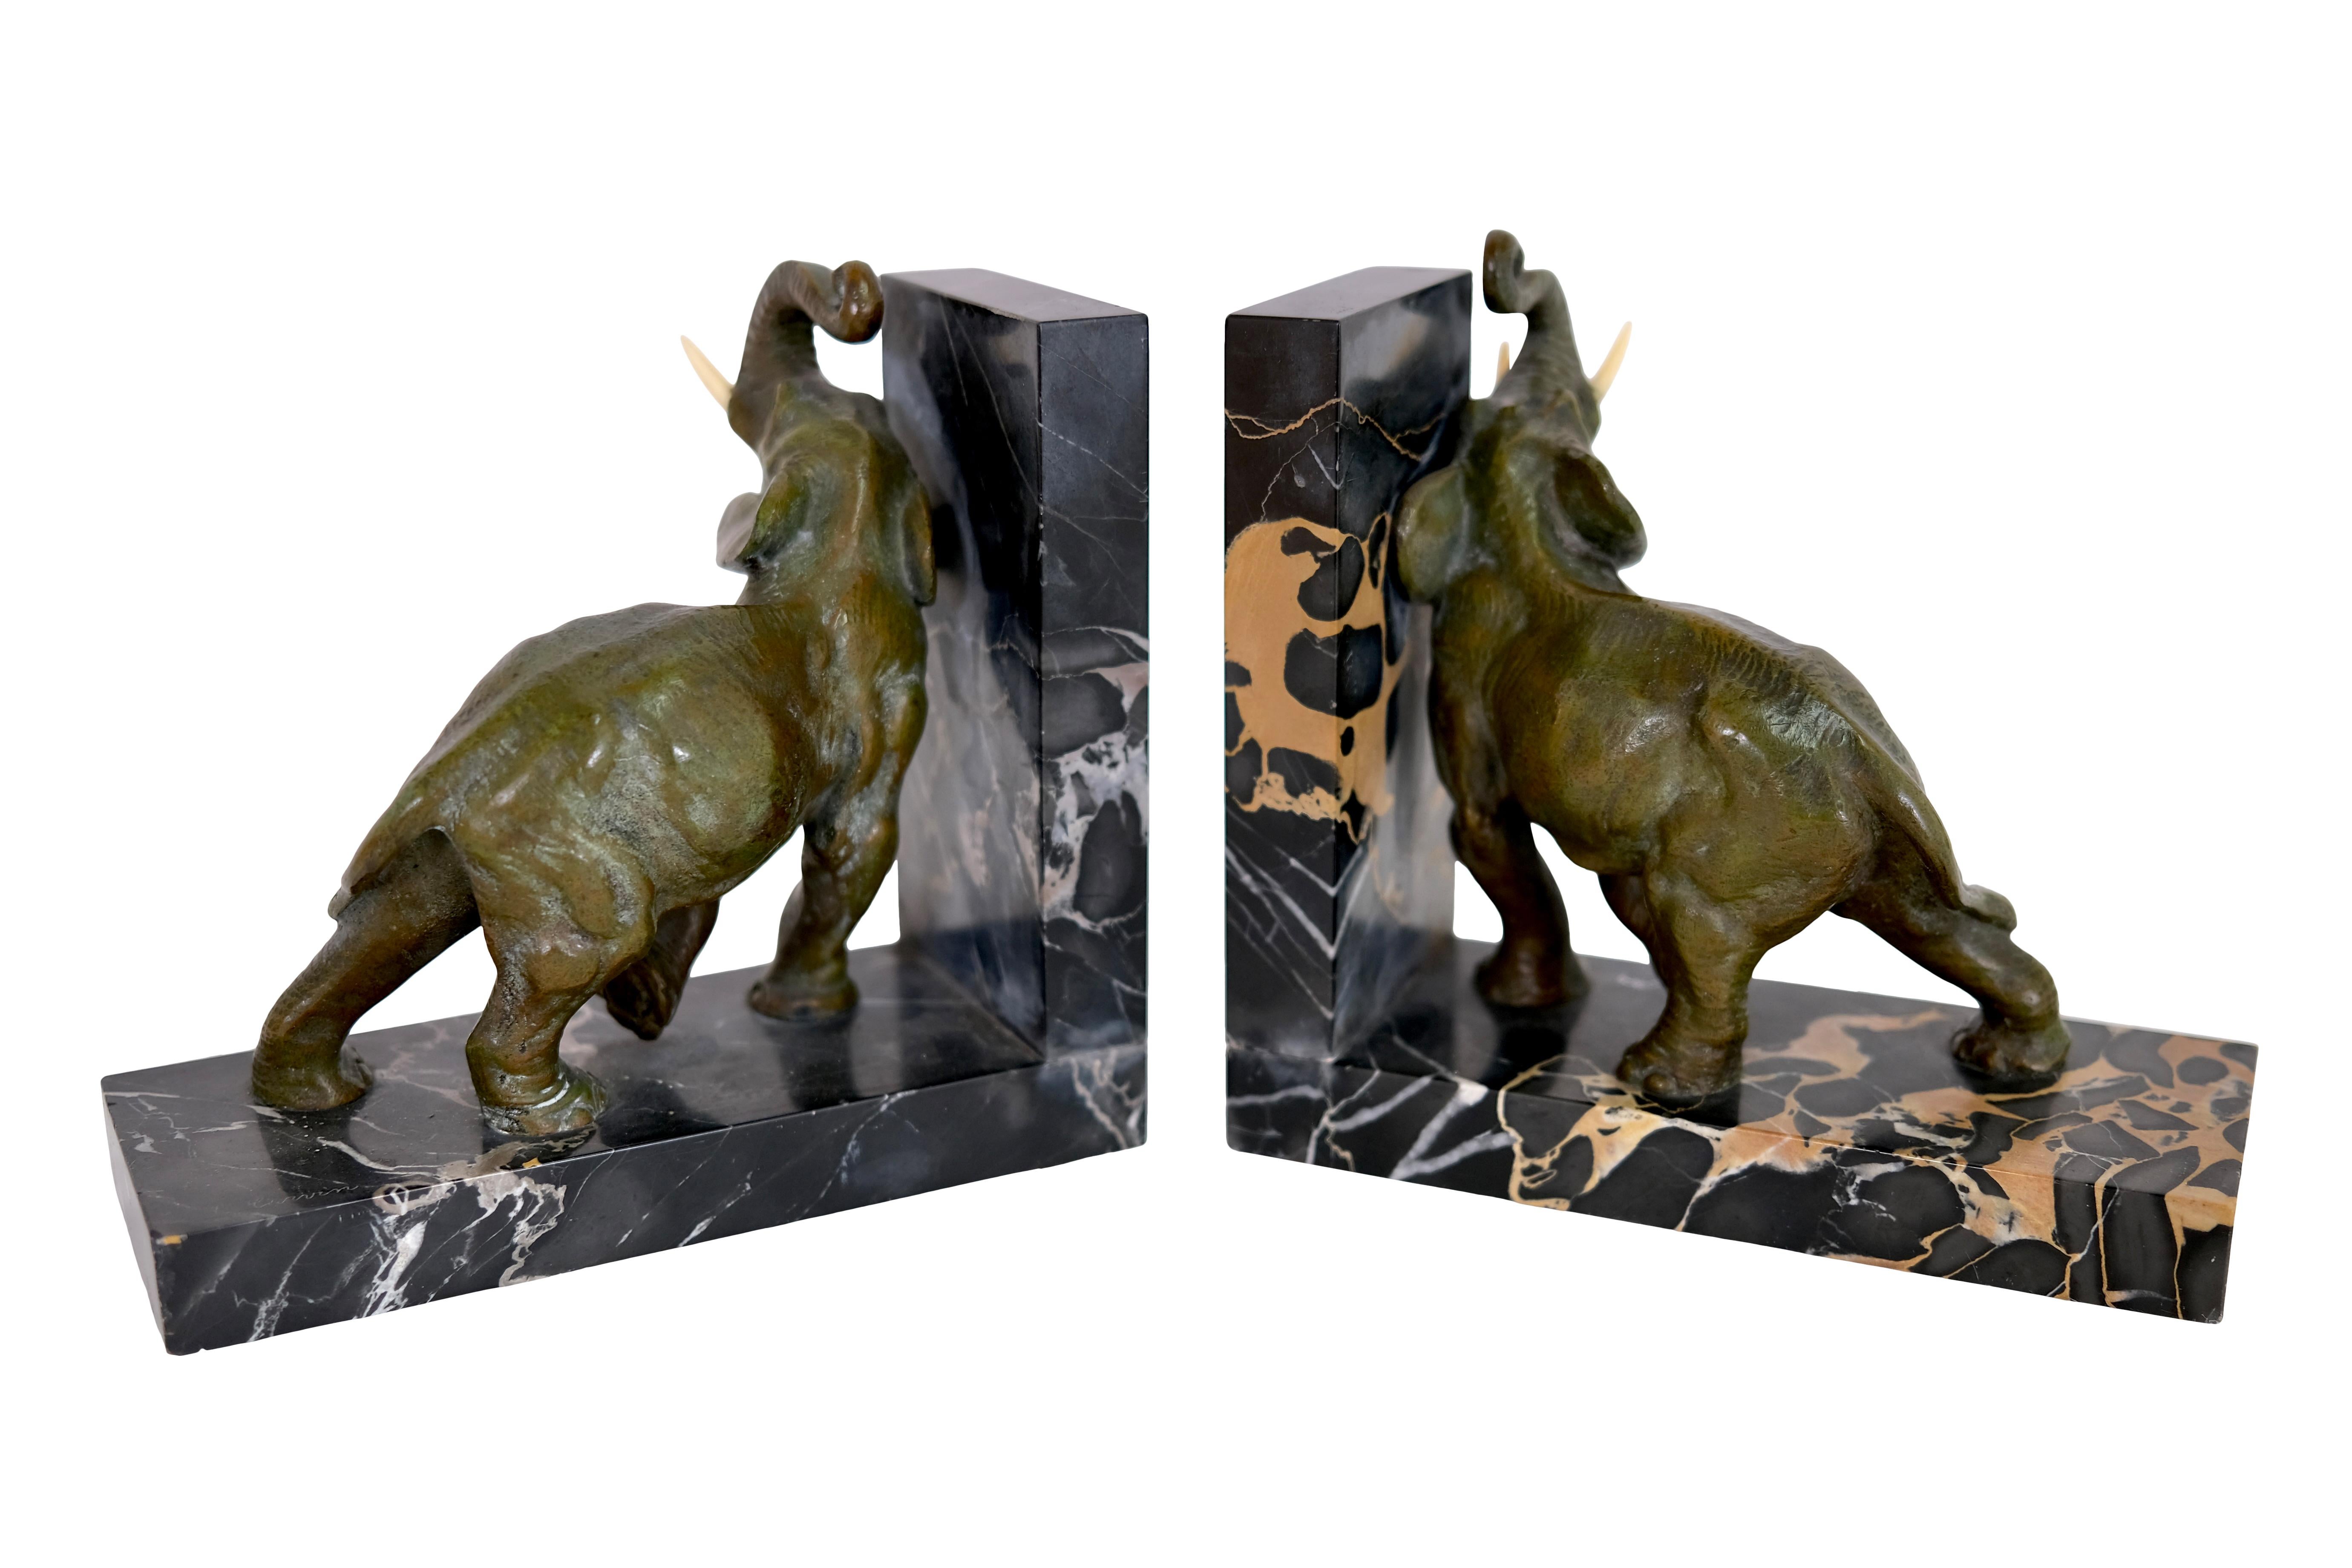 French Art Deco Bookends with Elephants in Bronze by Louis-Albert Carvin, France 1930s For Sale